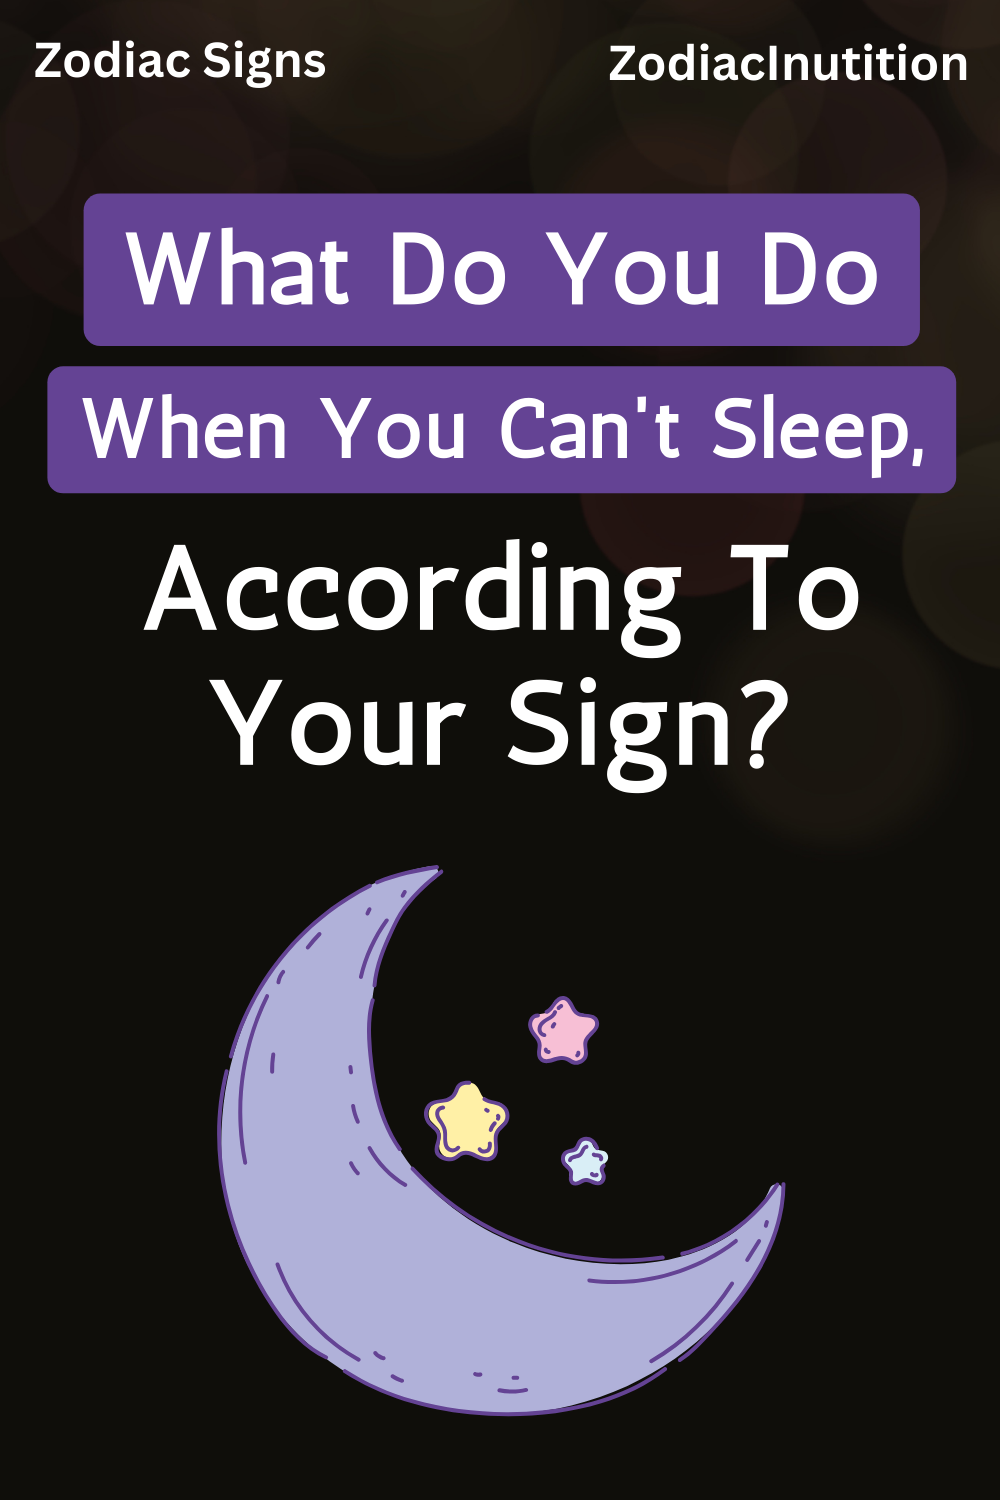 What Do You Do When You Can't Sleep, According To Your Sign?